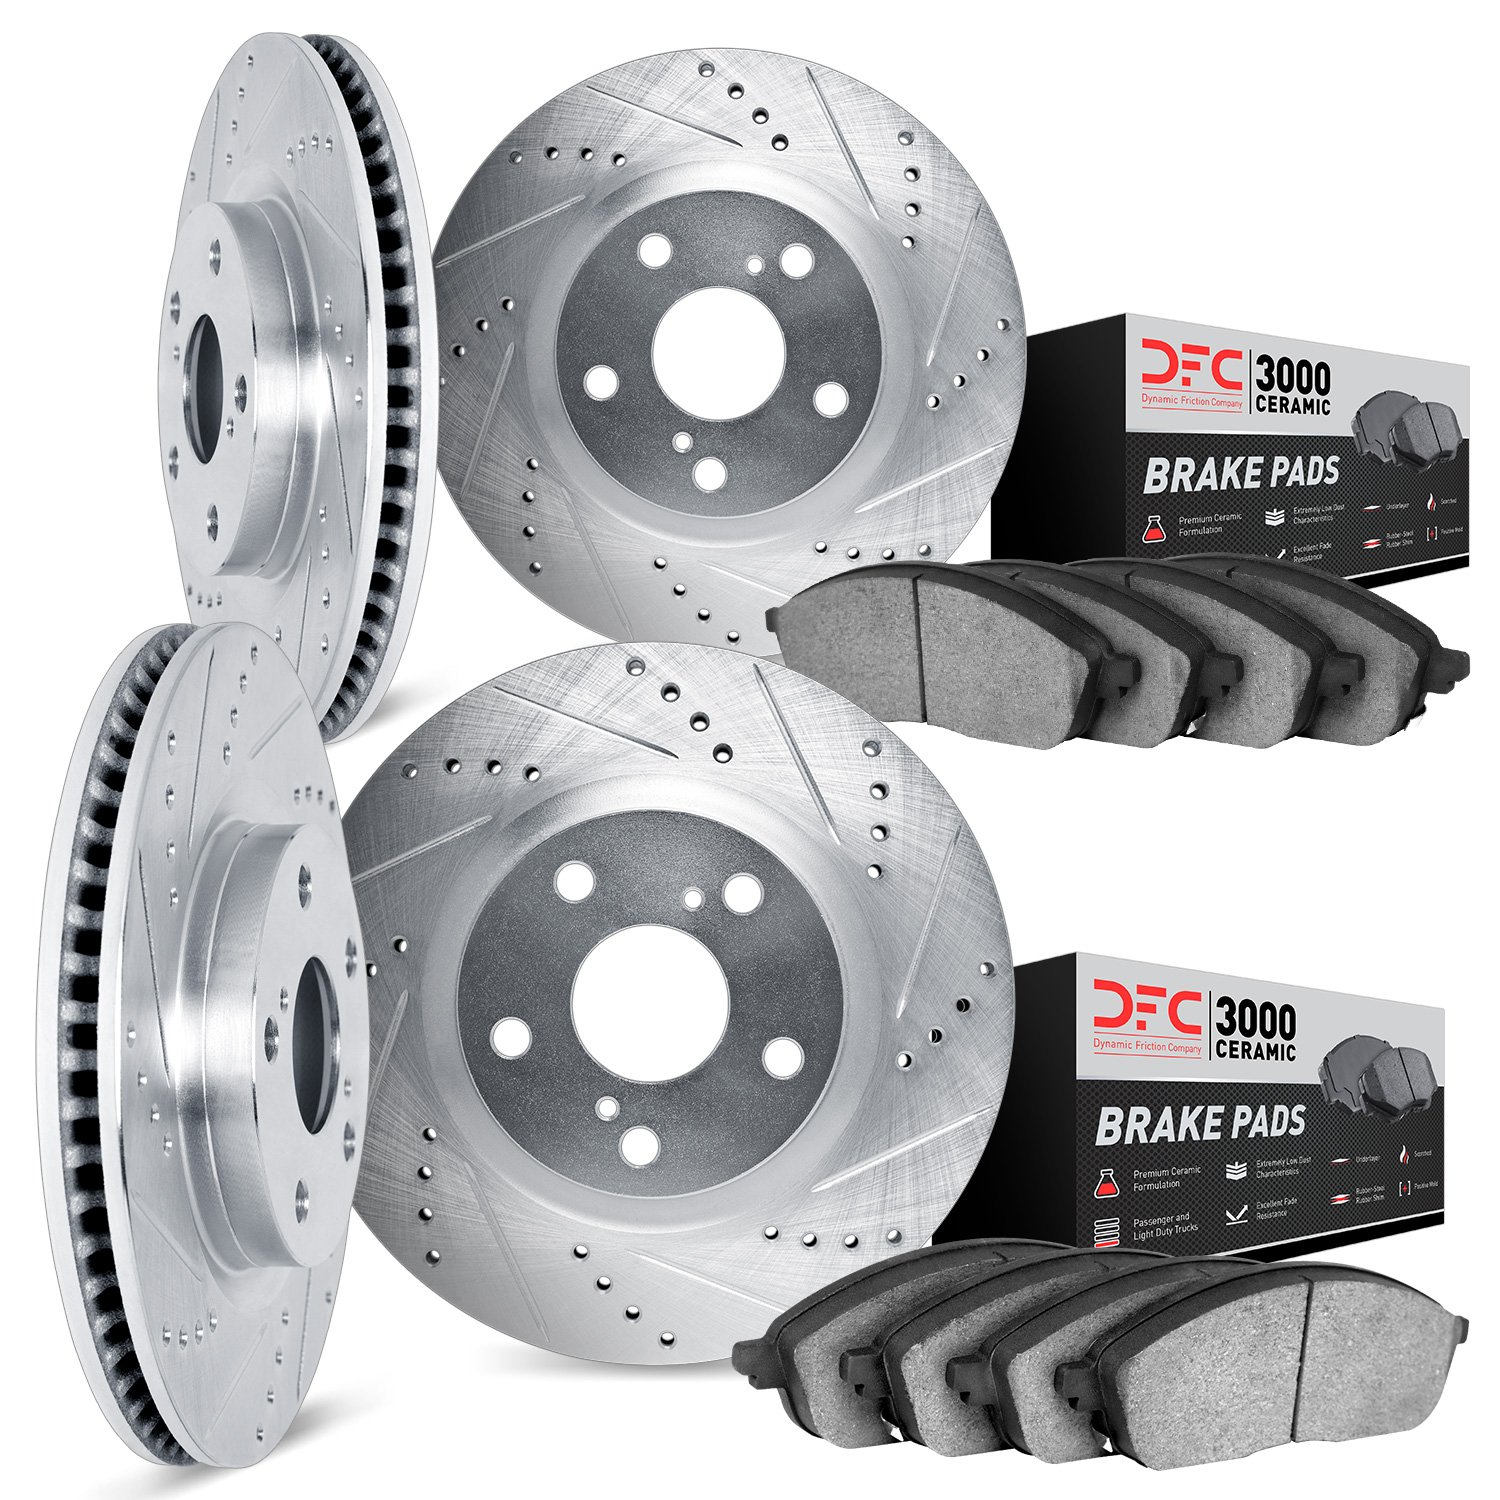 7304-54057 Drilled/Slotted Brake Rotor with 3000-Series Ceramic Brake Pads Kit [Silver], 2010-2011 Ford/Lincoln/Mercury/Mazda, P